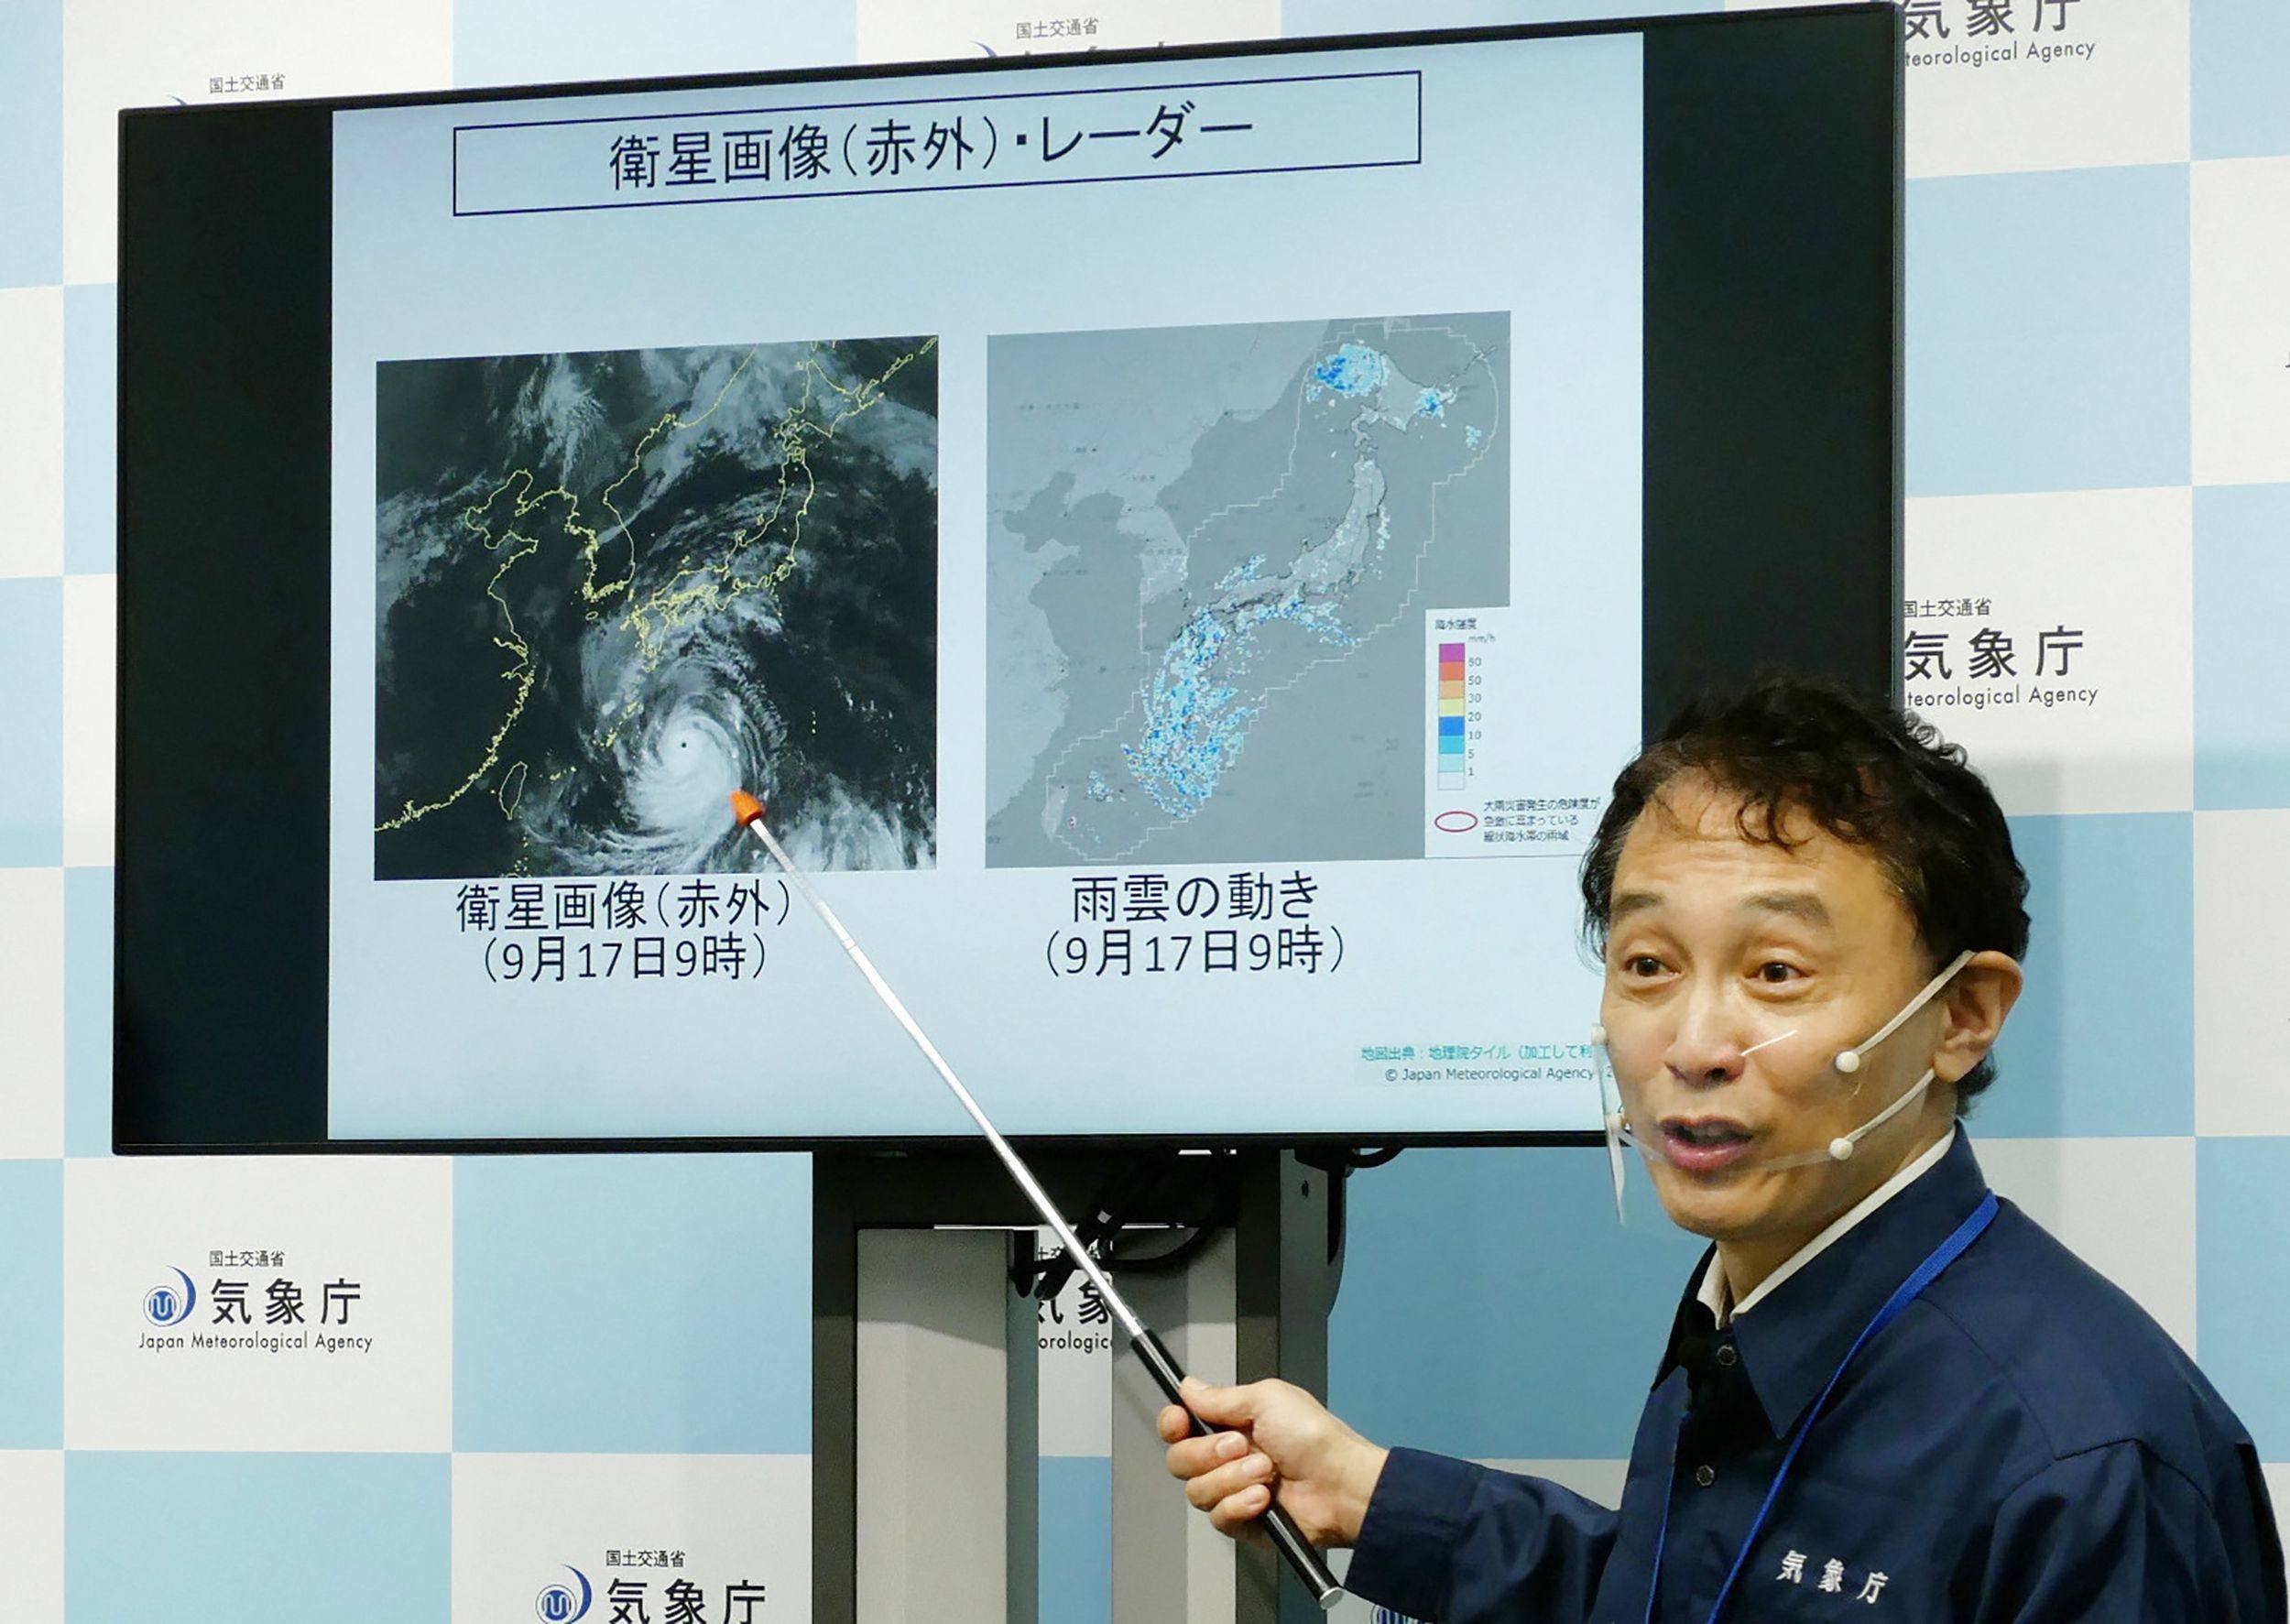 A director of the Japan Meteorological Agency’s Forecast Division holds a press conference on Typhoon Nanmadol in Tokyo on September 17. There are risks of unprecedented storms, high waves, storm surges, and record rainfall. Photo: JIJI Press/AFP